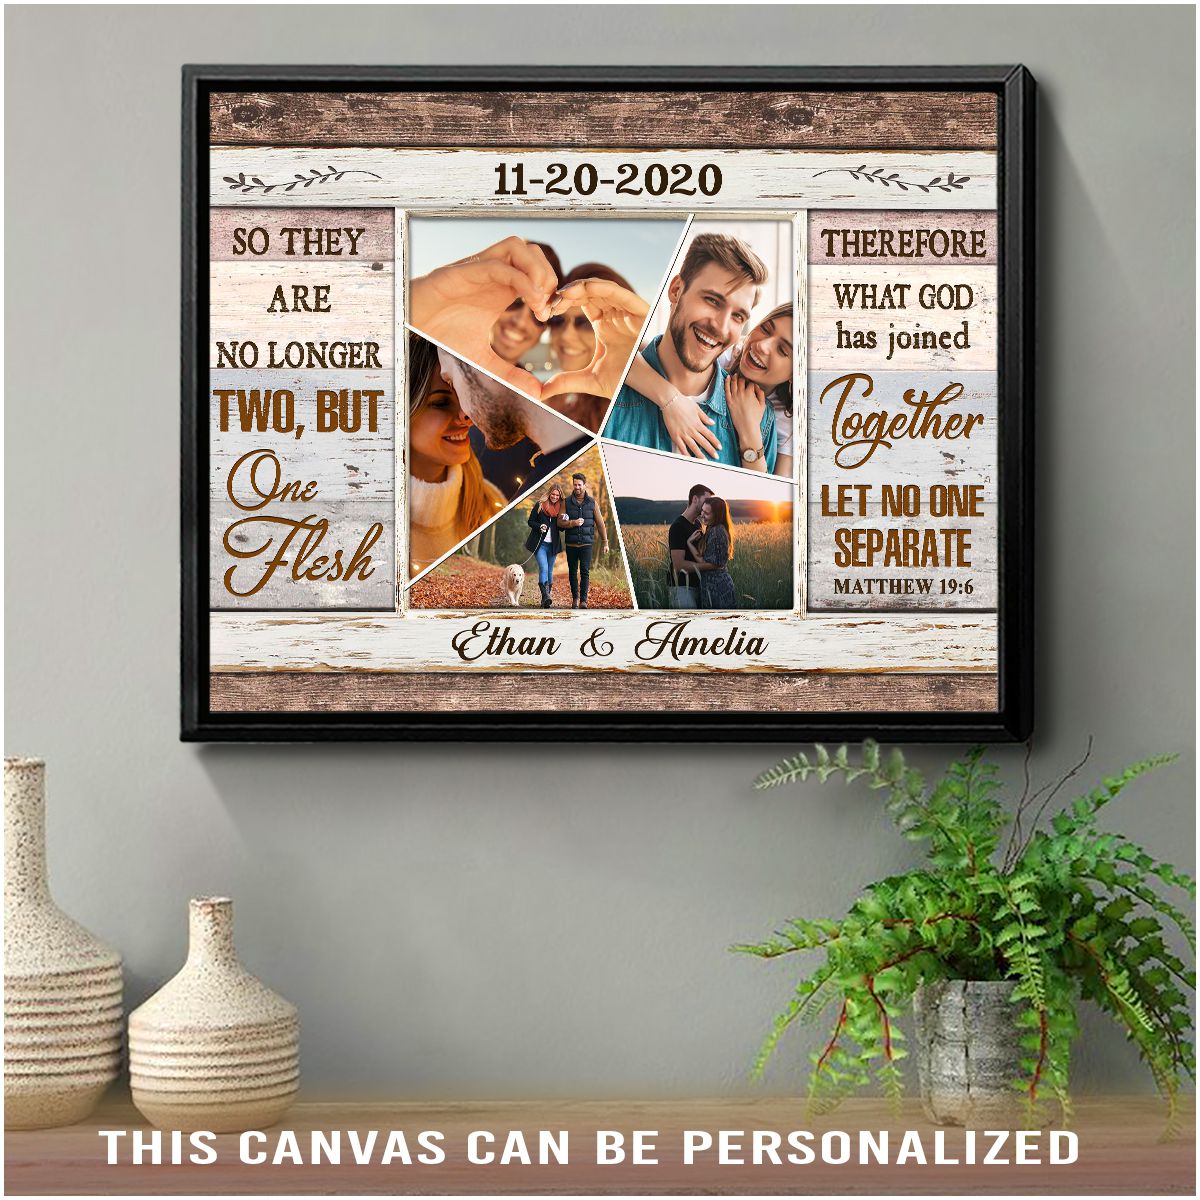 https://images.ohcanvas.com/ohcanvas_com/2022/07/08003438/unique-gifts-for-couples-who-have-everything-personalized-couple-photo-collage-canvas-print02.jpg